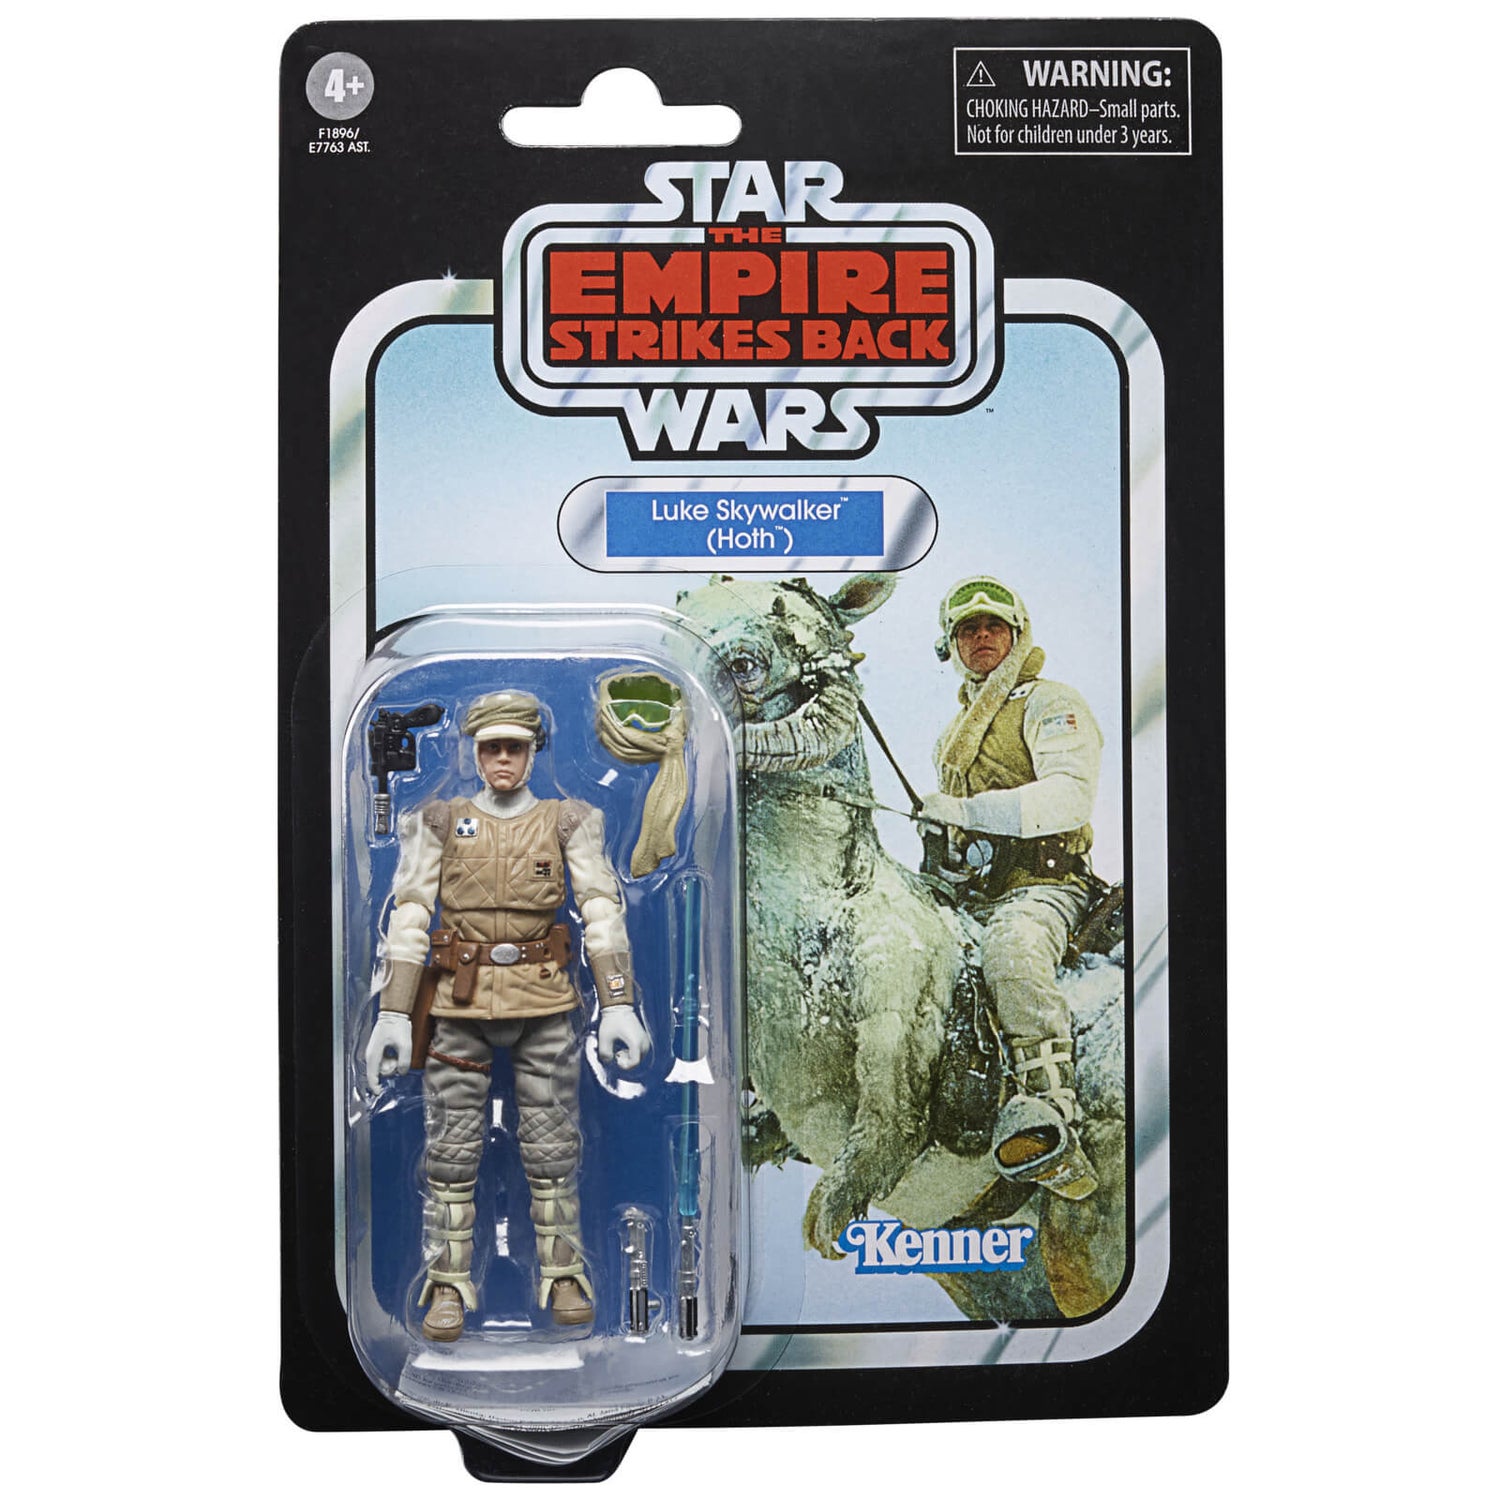 Hasbro Star Wars The Vintage Collection The Empire Strikes Back Luke Skywalker (Hoth) Action Figure